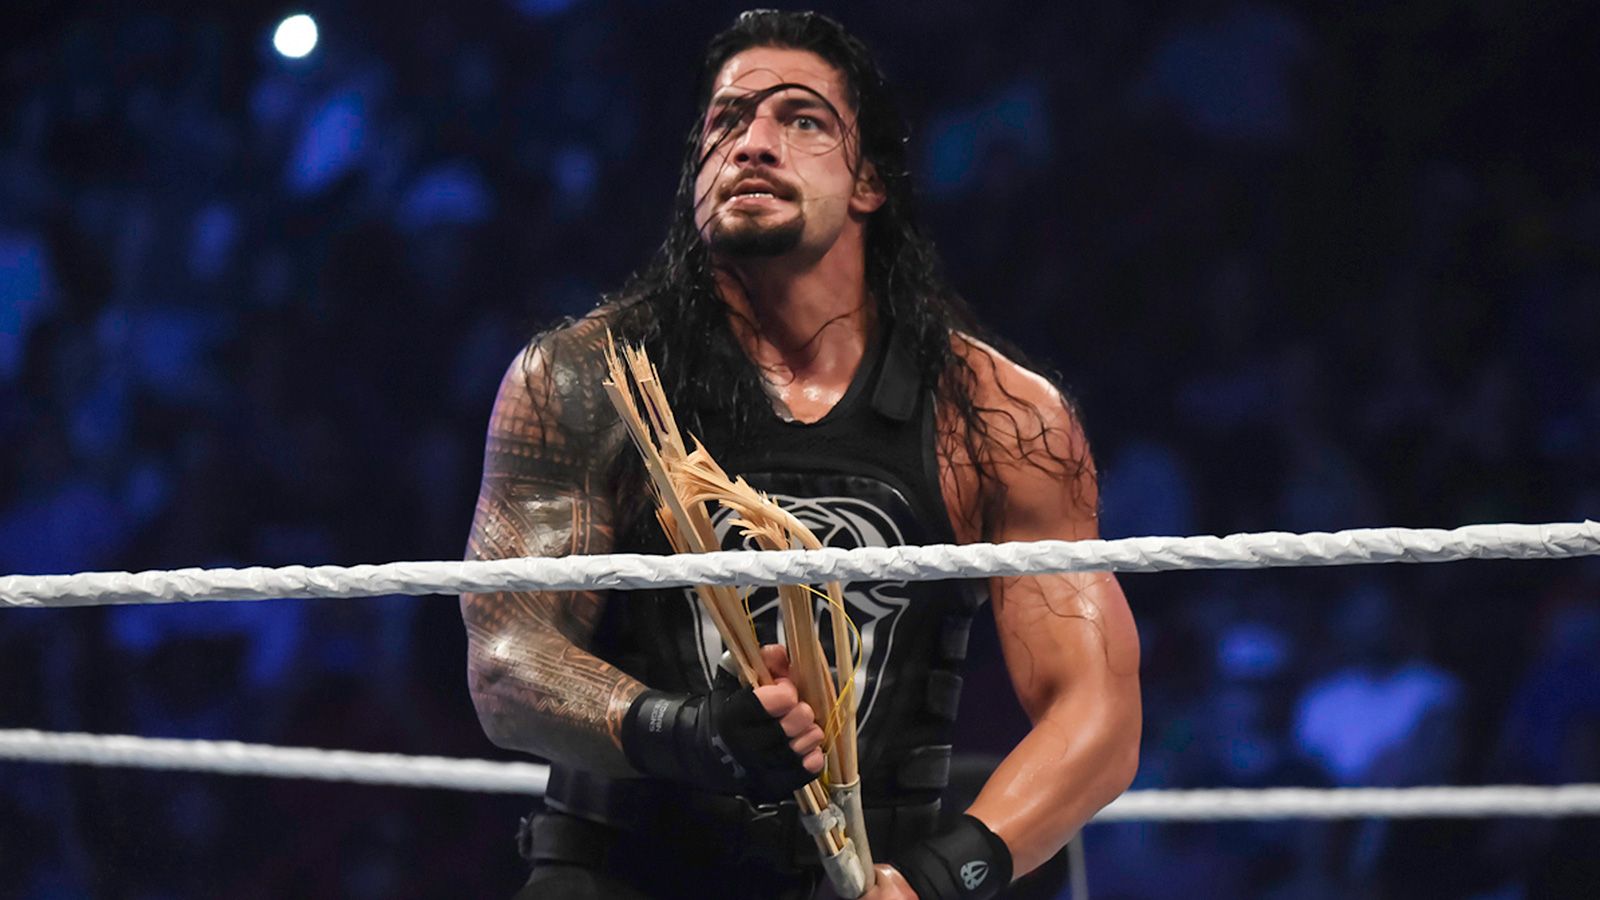 Roman Reigns' WWE title win sets path to Royal Rumble